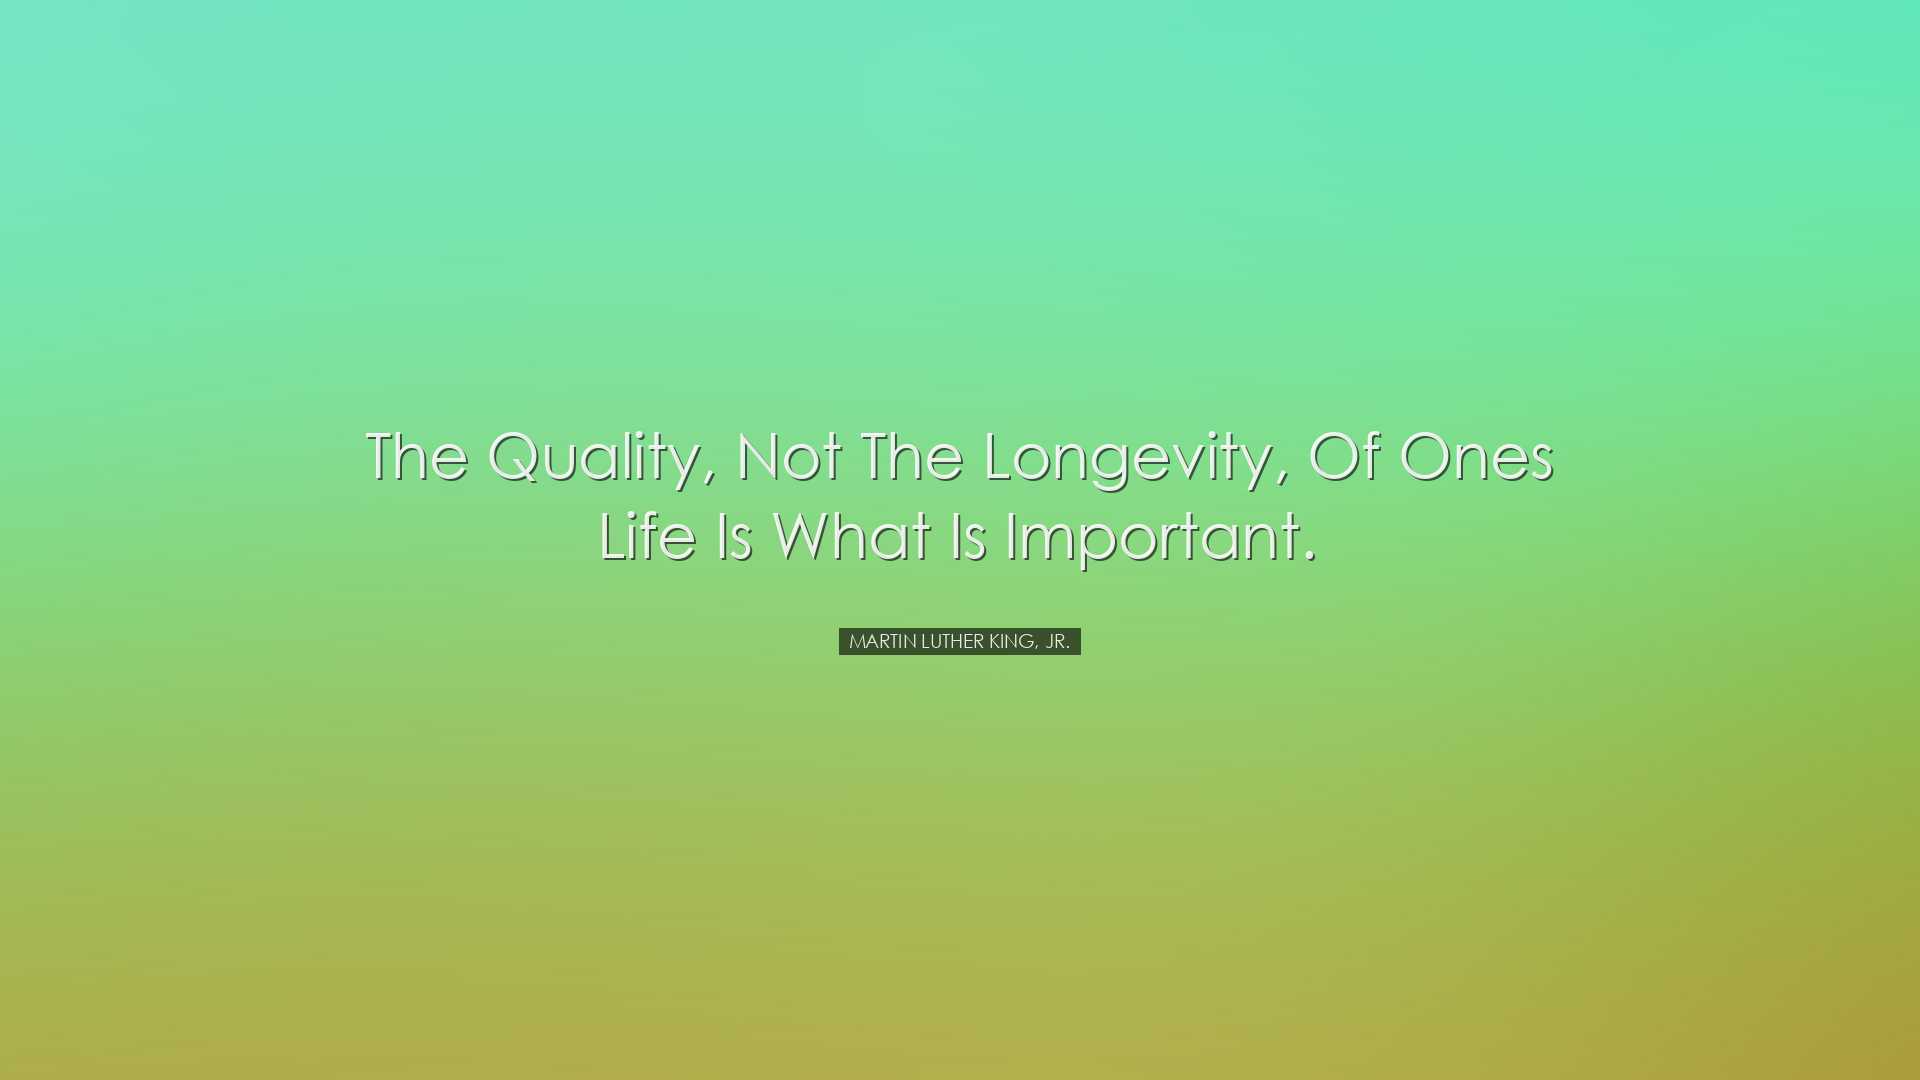 The quality, not the longevity, of ones life is what is important.